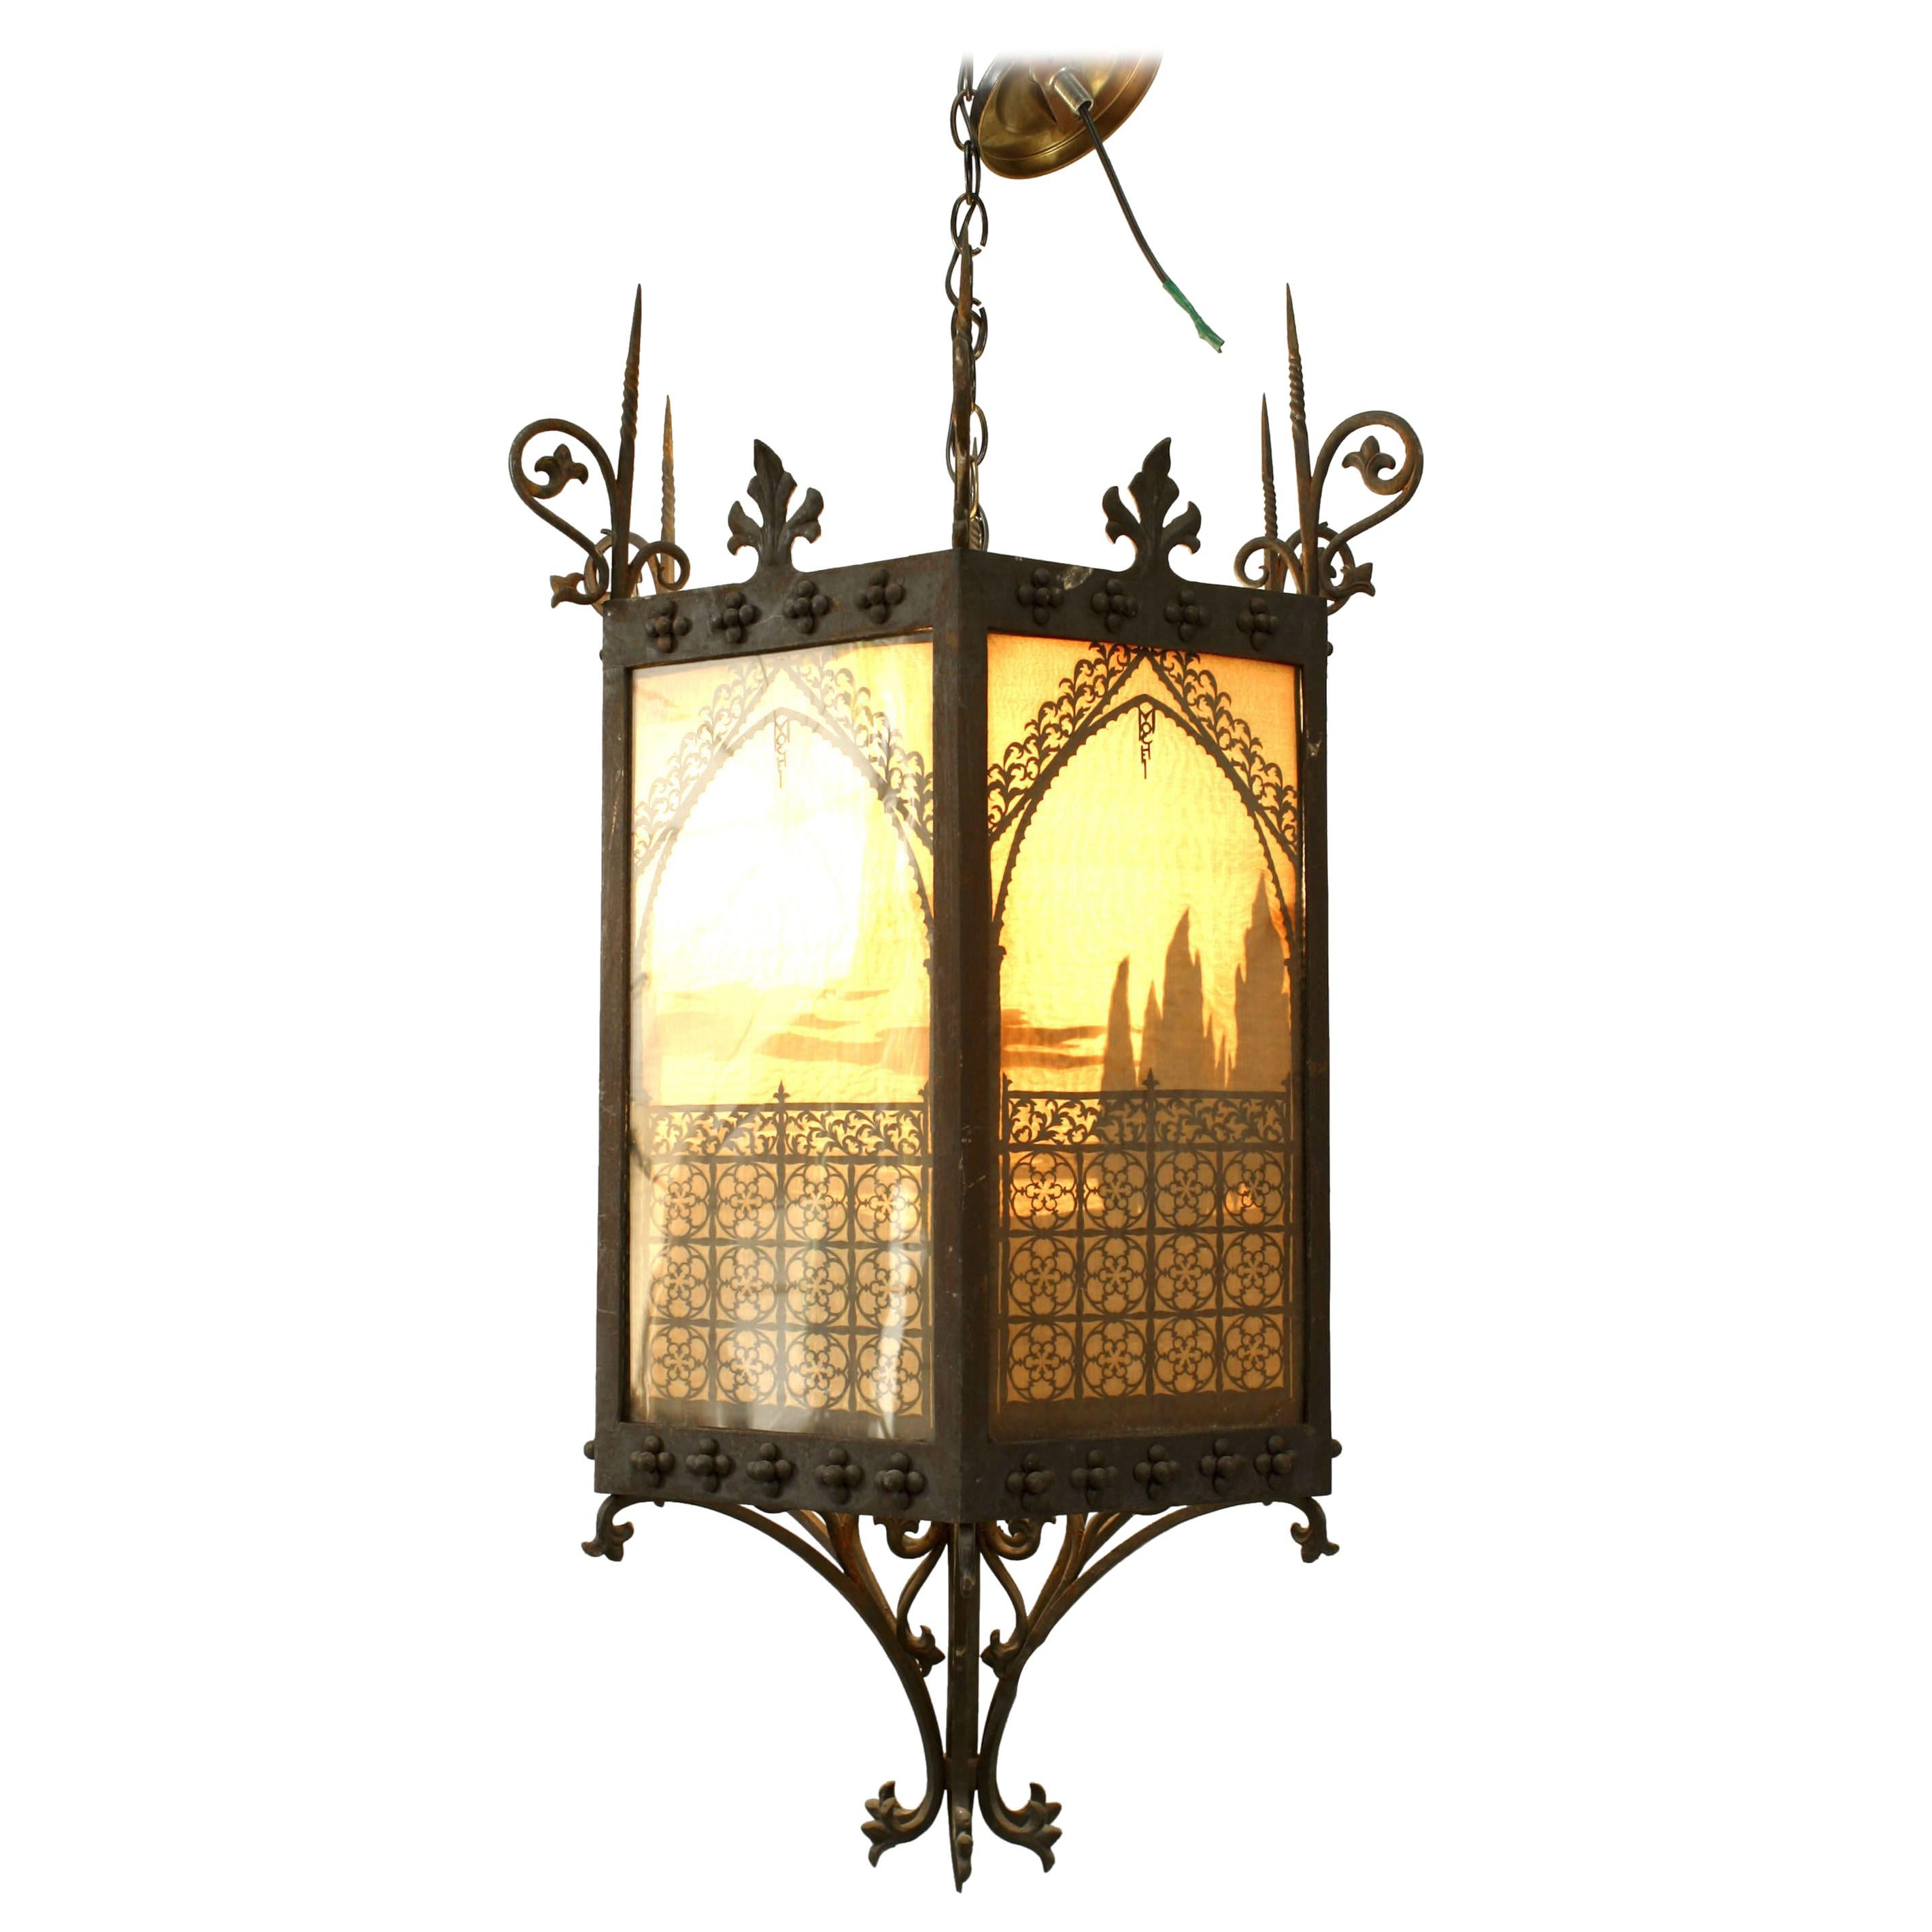 2 Italian Renaissance Style iron and Glass Hanging Lanterns For Sale